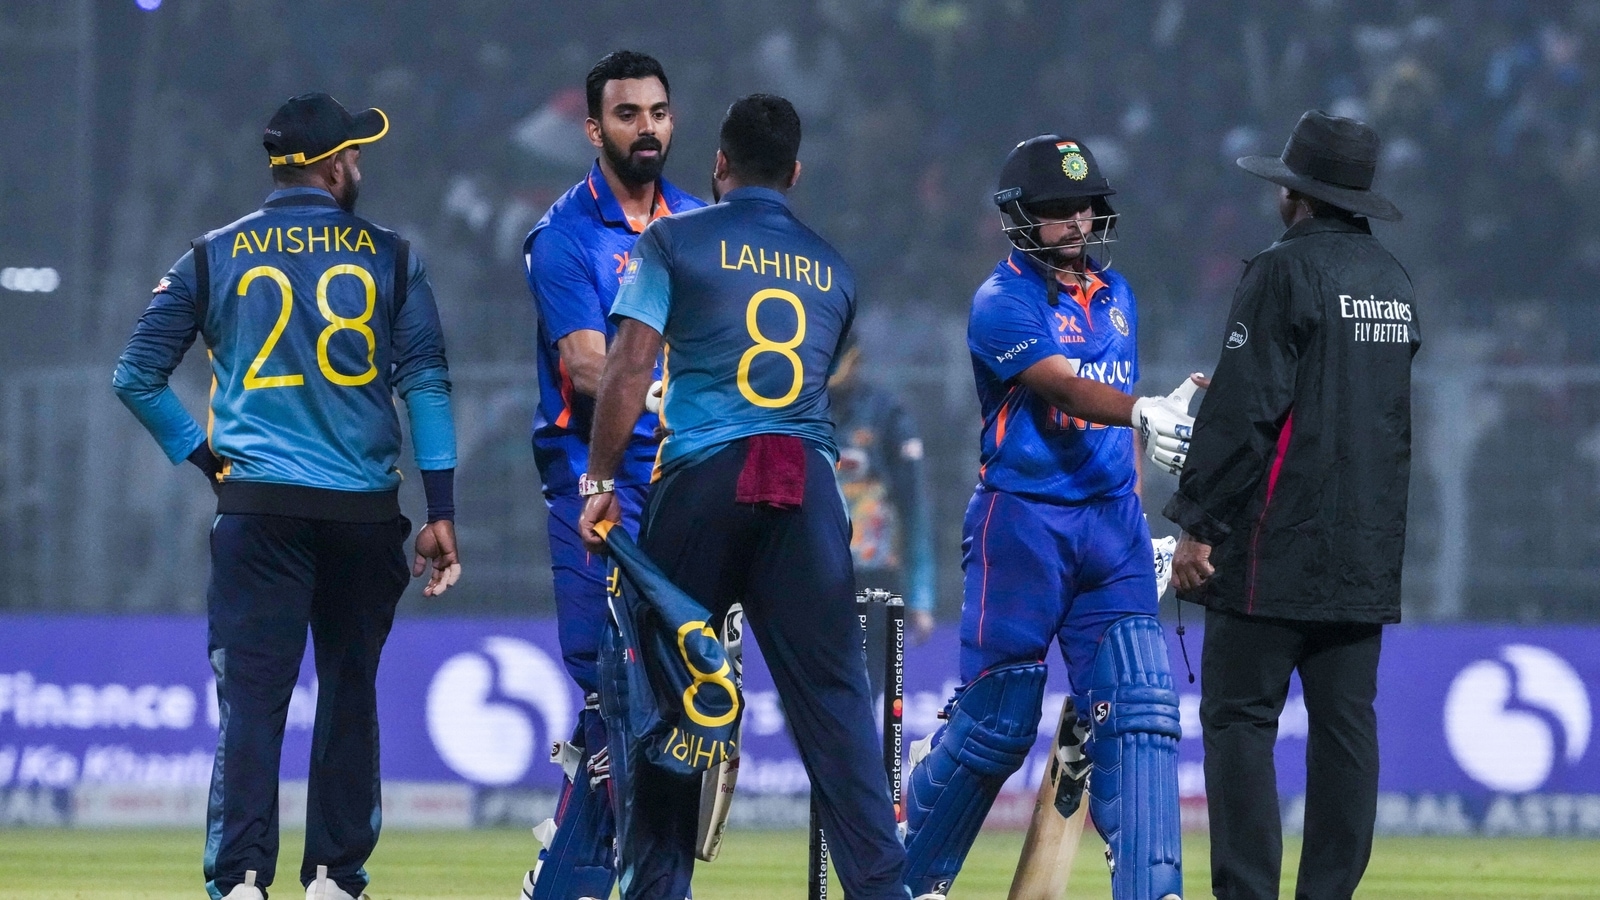 Sri Lankan cricket team to wear 'eco-friendly' jersey in 12th ICC World Cup